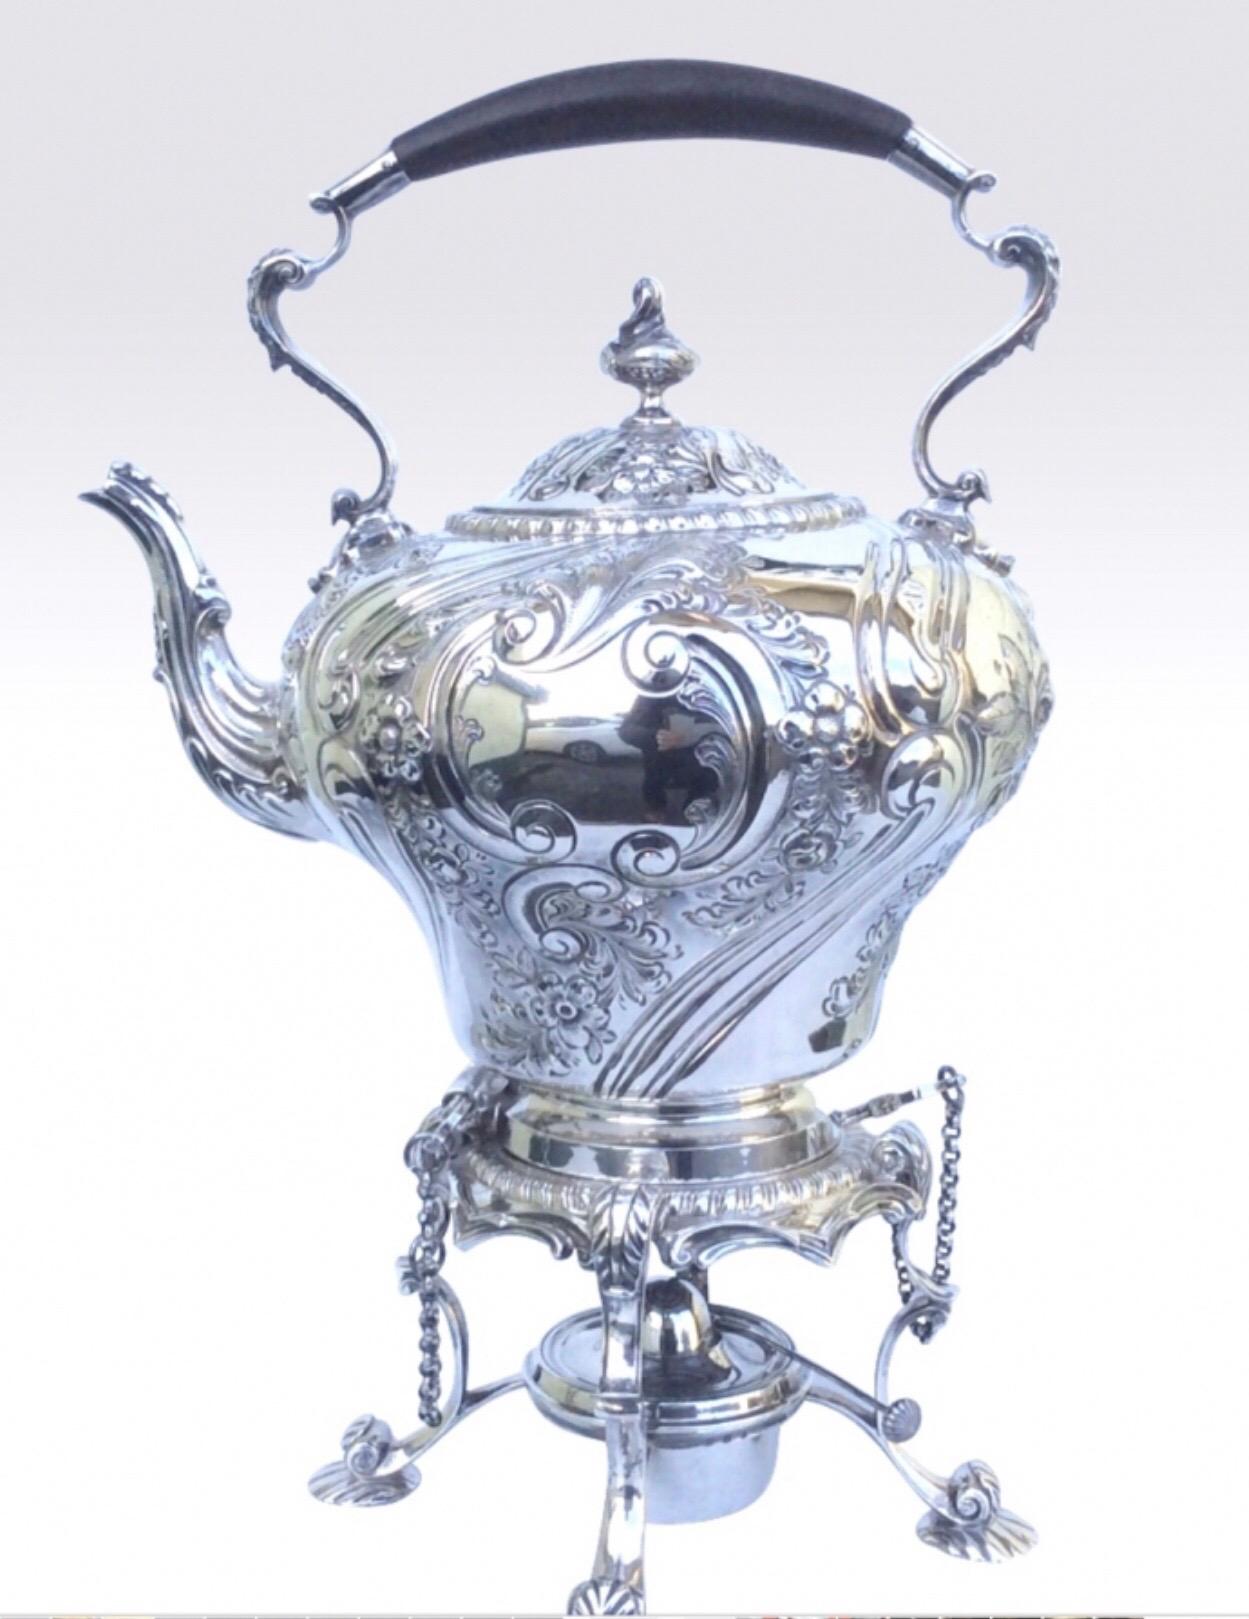 Magnificent antique solid sterling silver spirit kettle
A wonderful example of a solid sterling silver spirit kettle.
Hallmarked throughout for Birmingham 1905,with the maker's mark of Elkington & Co Ltd. The kettle stand has four splay feet which